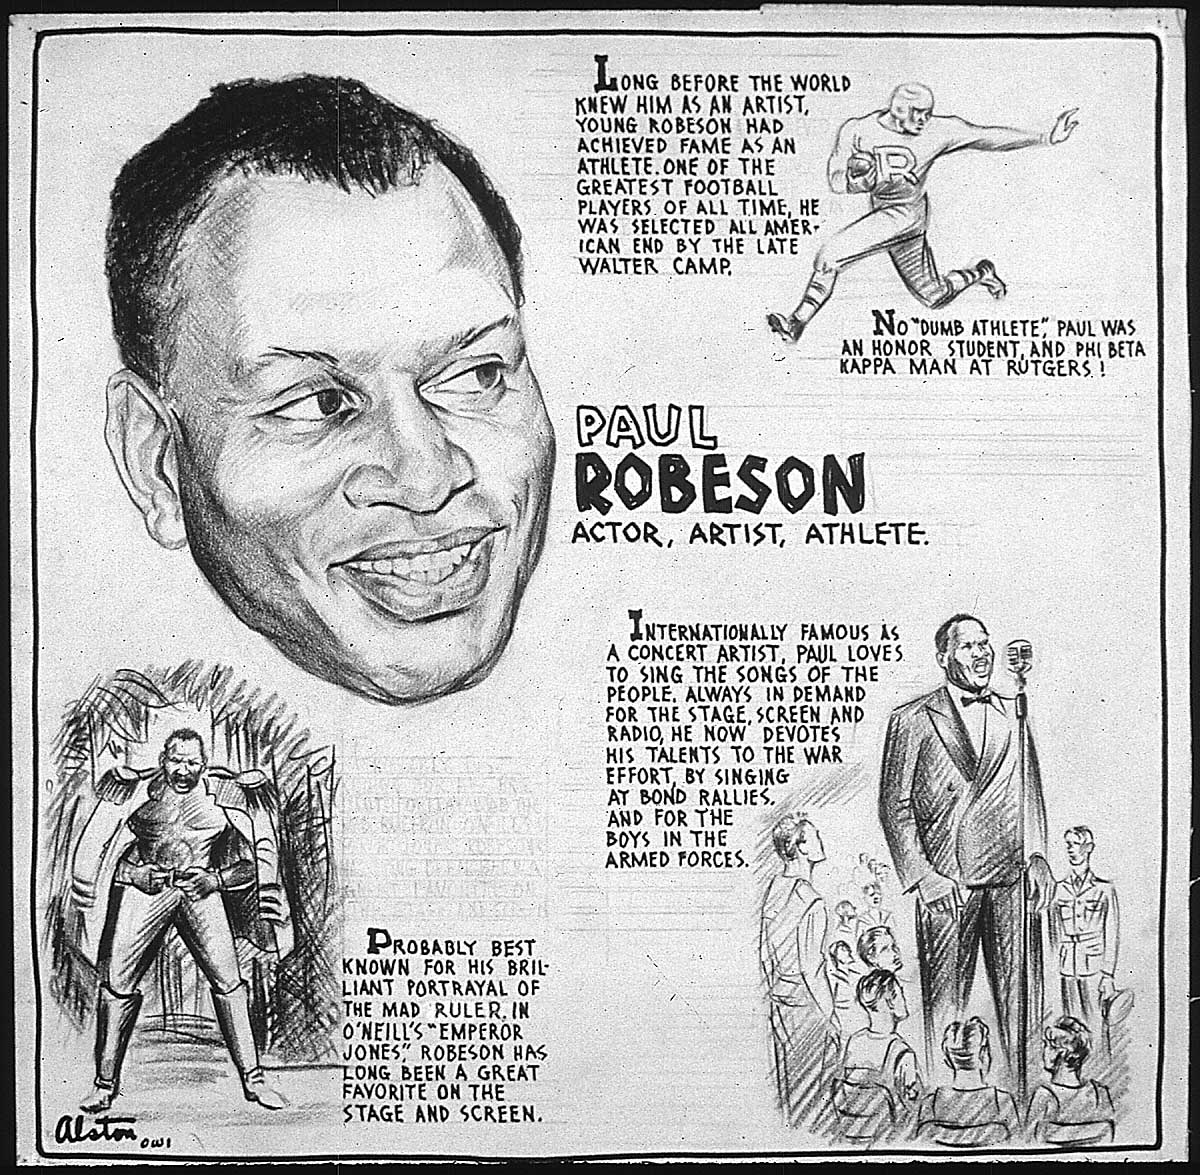 drawing of Robeson as actor, artist, athlete